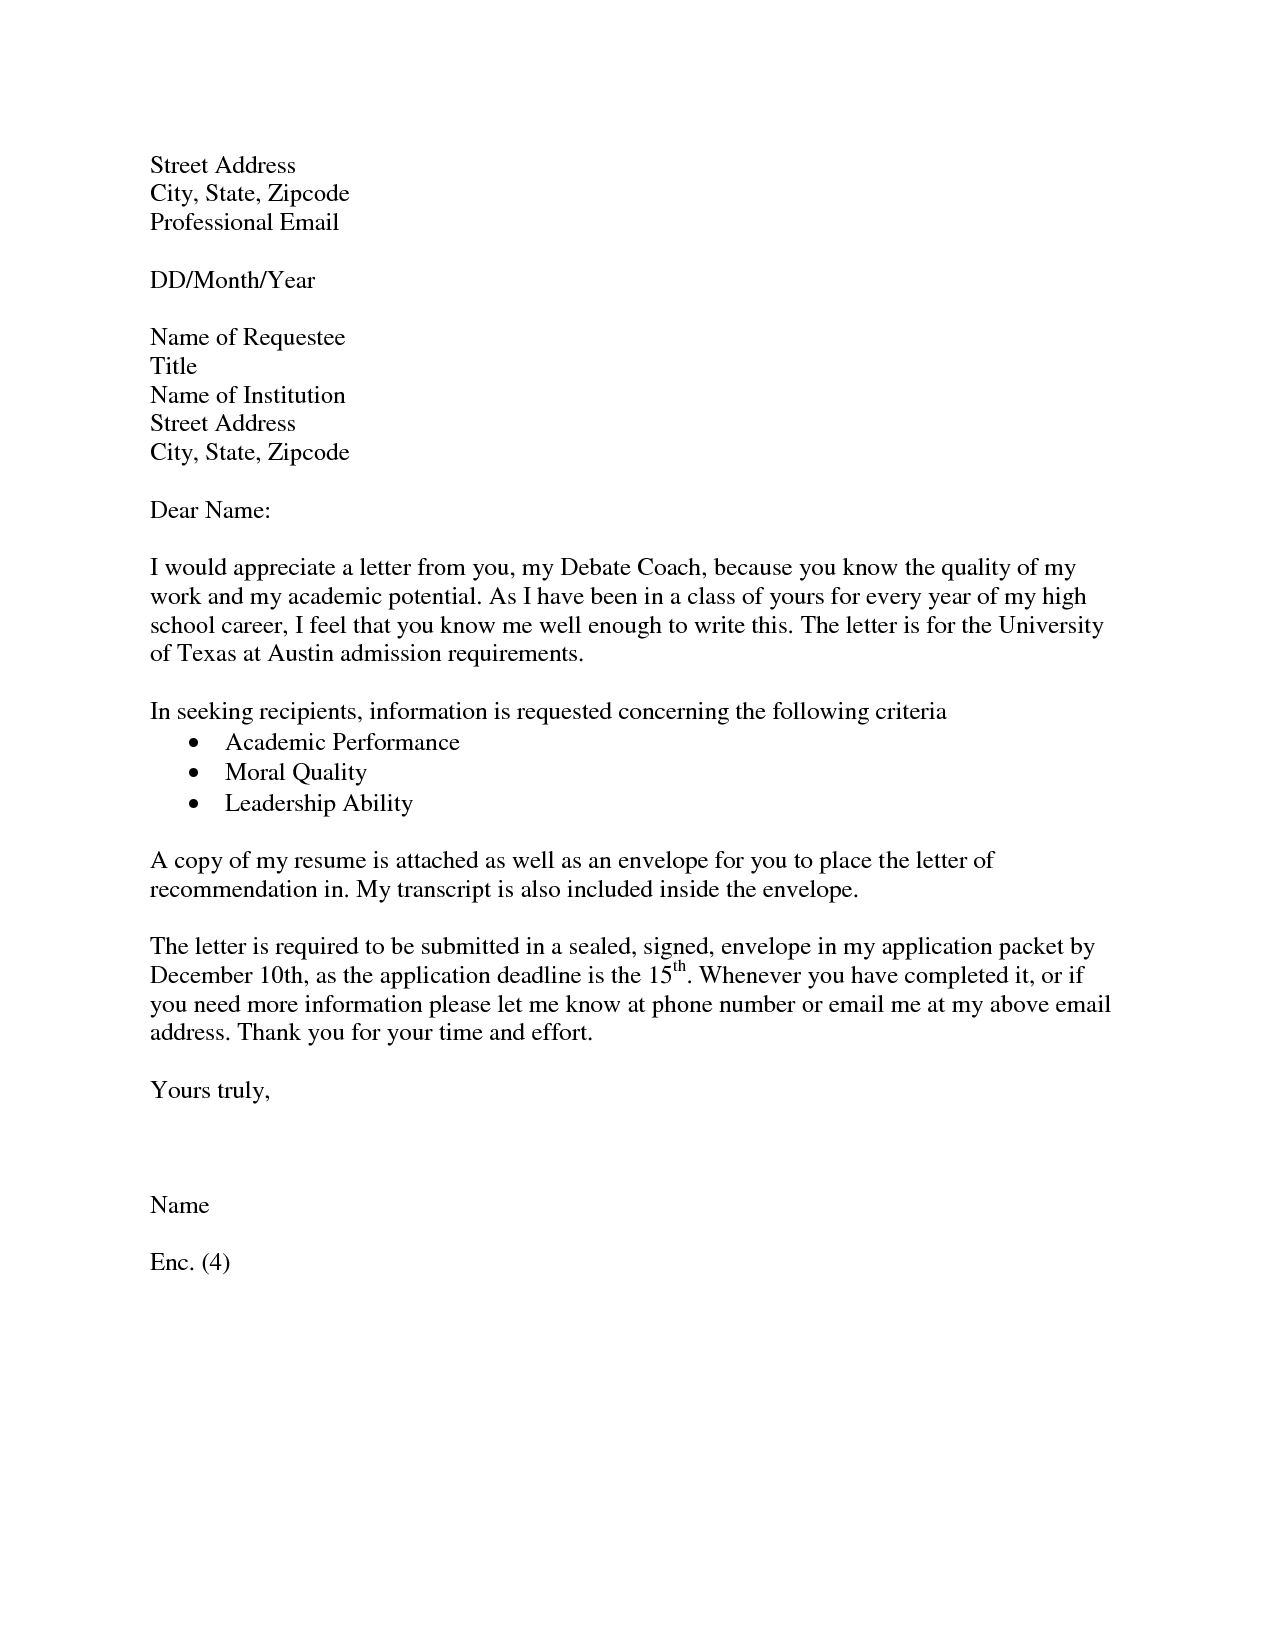 Recommendation Letter Request Sample | templates free printable